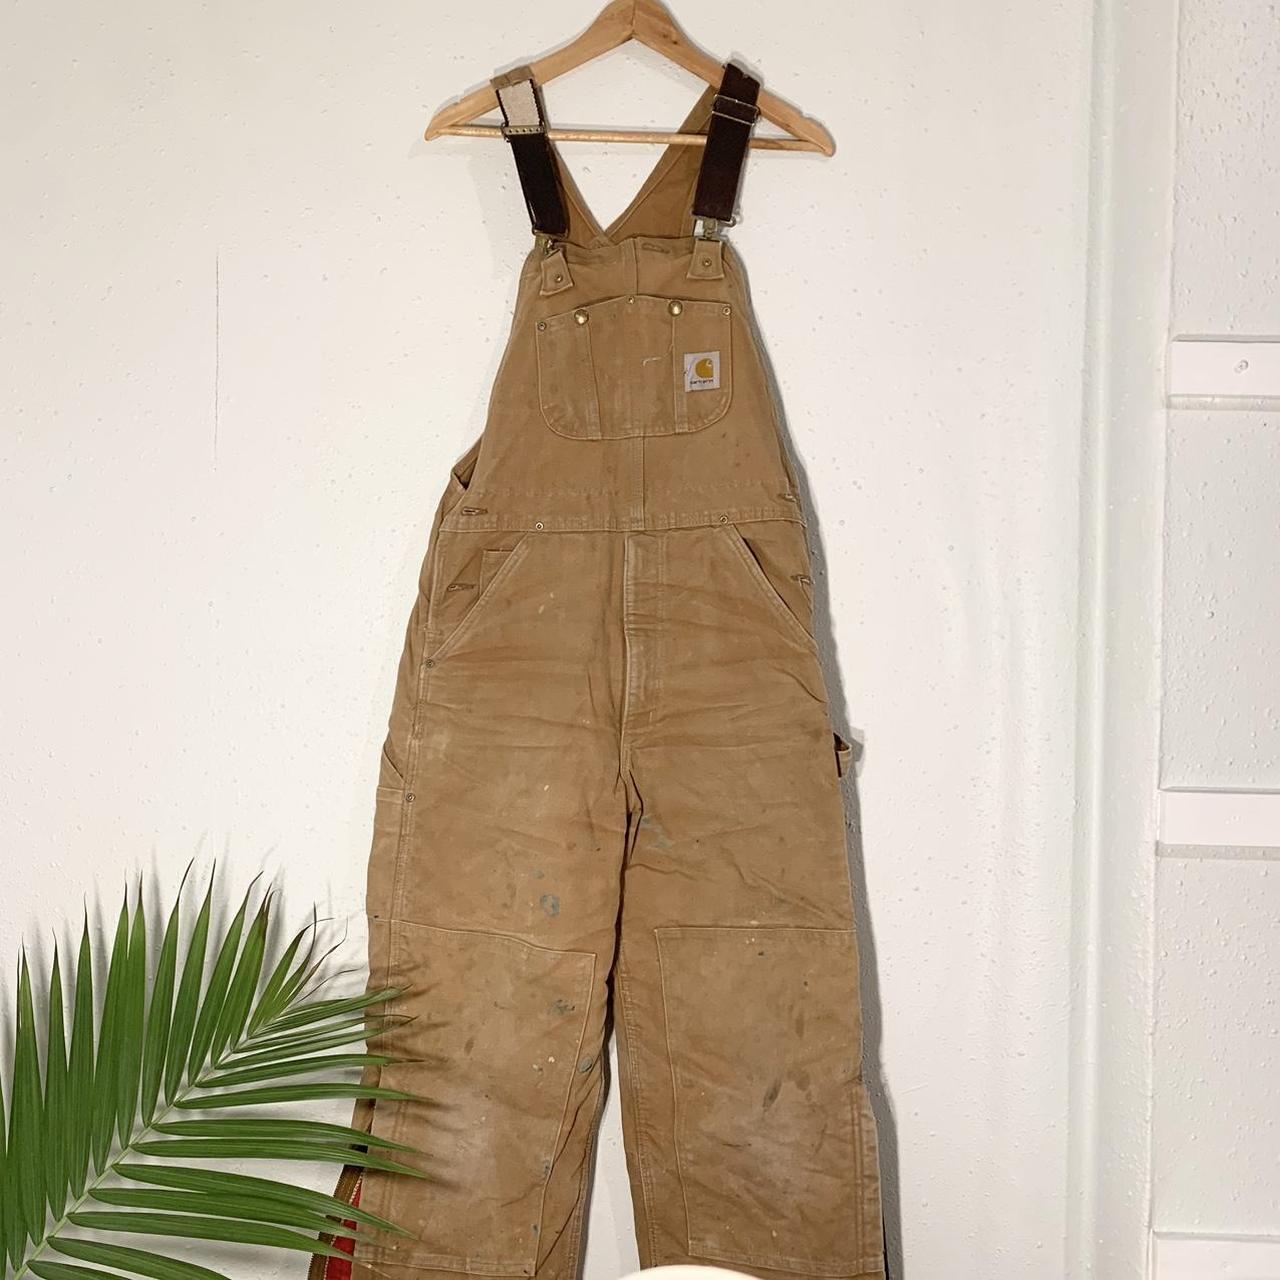 item listed by kidsseethrift